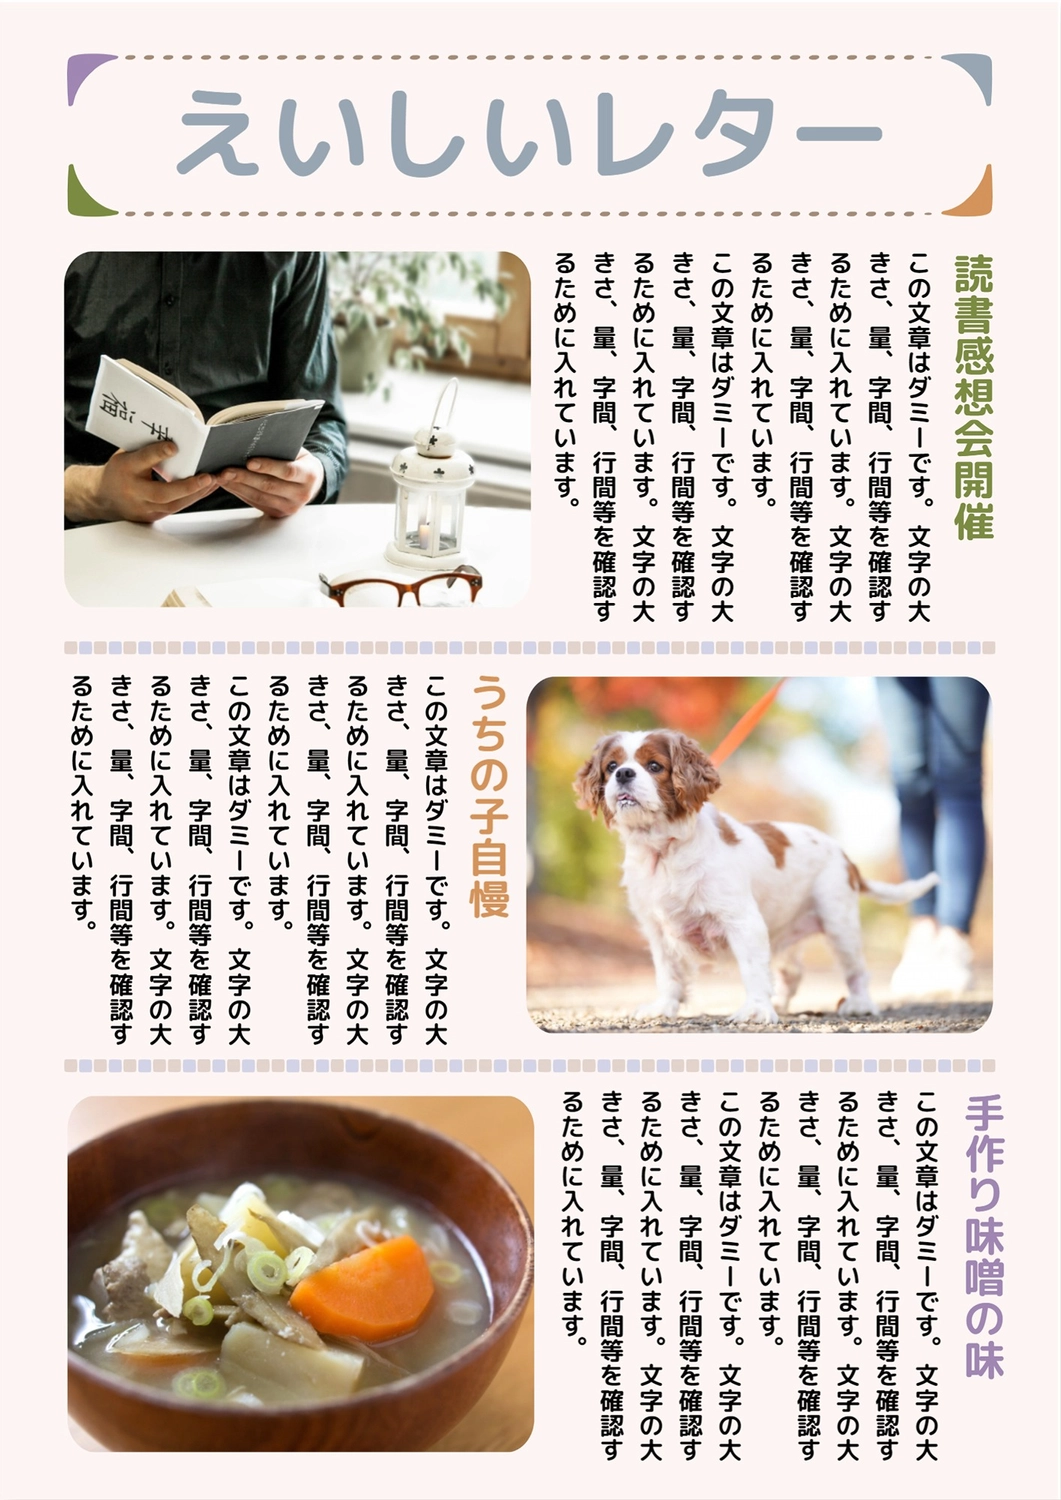 News template 8721, Senior, reading club, cooking, News template